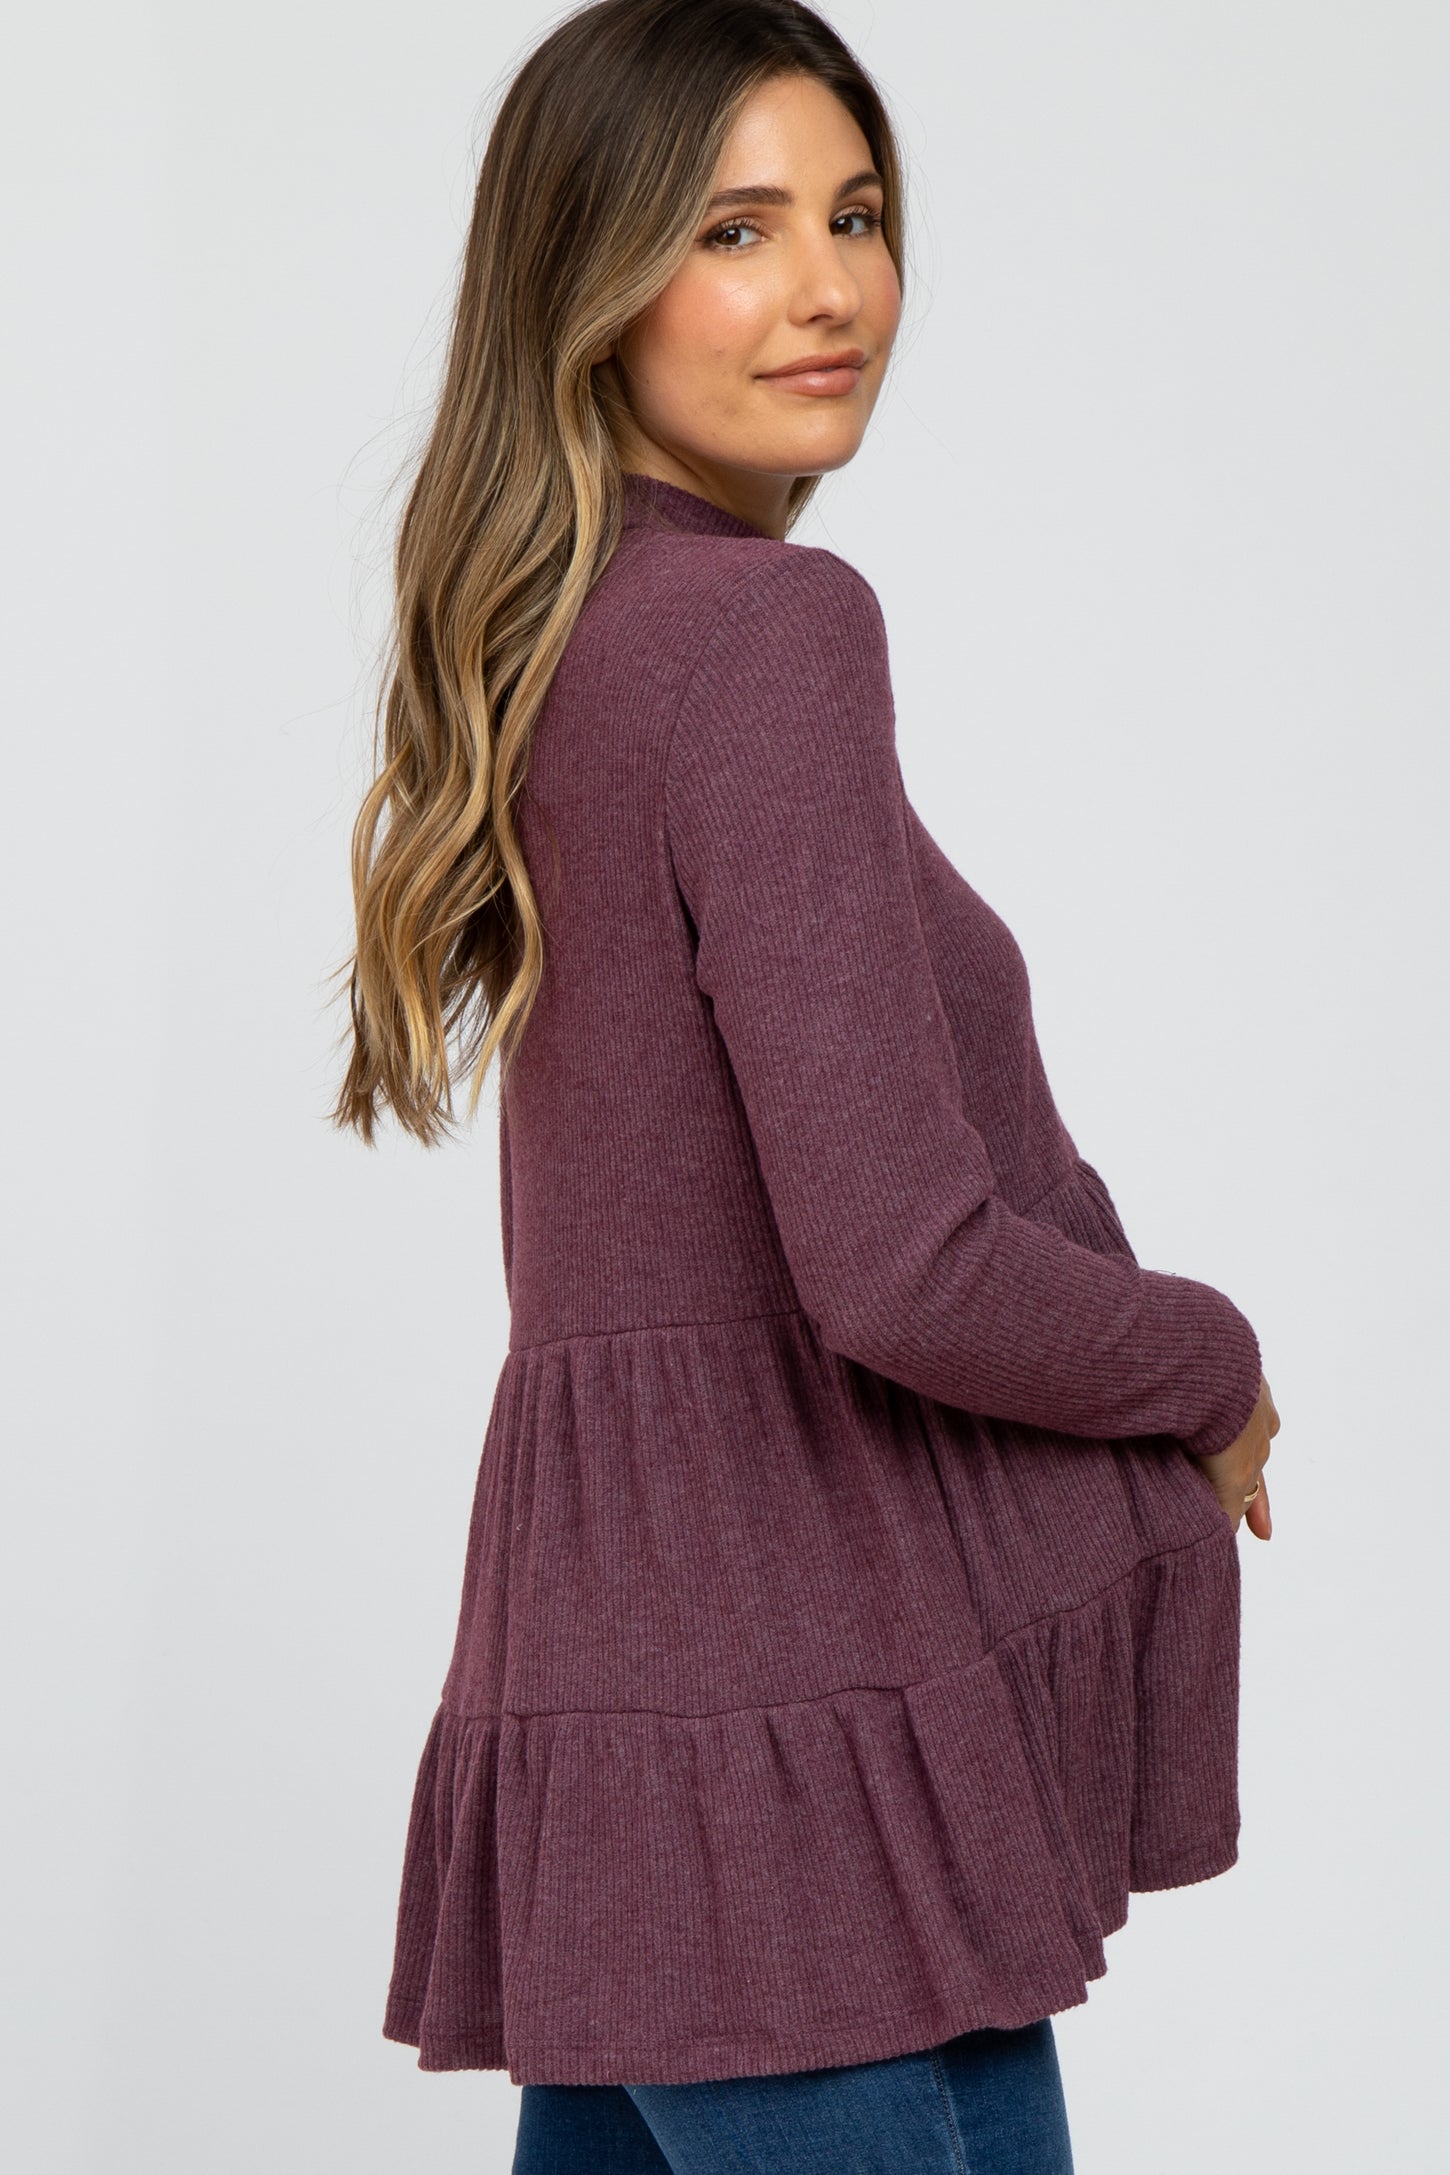 Plum Brushed Tiered Mock Neck Maternity Top